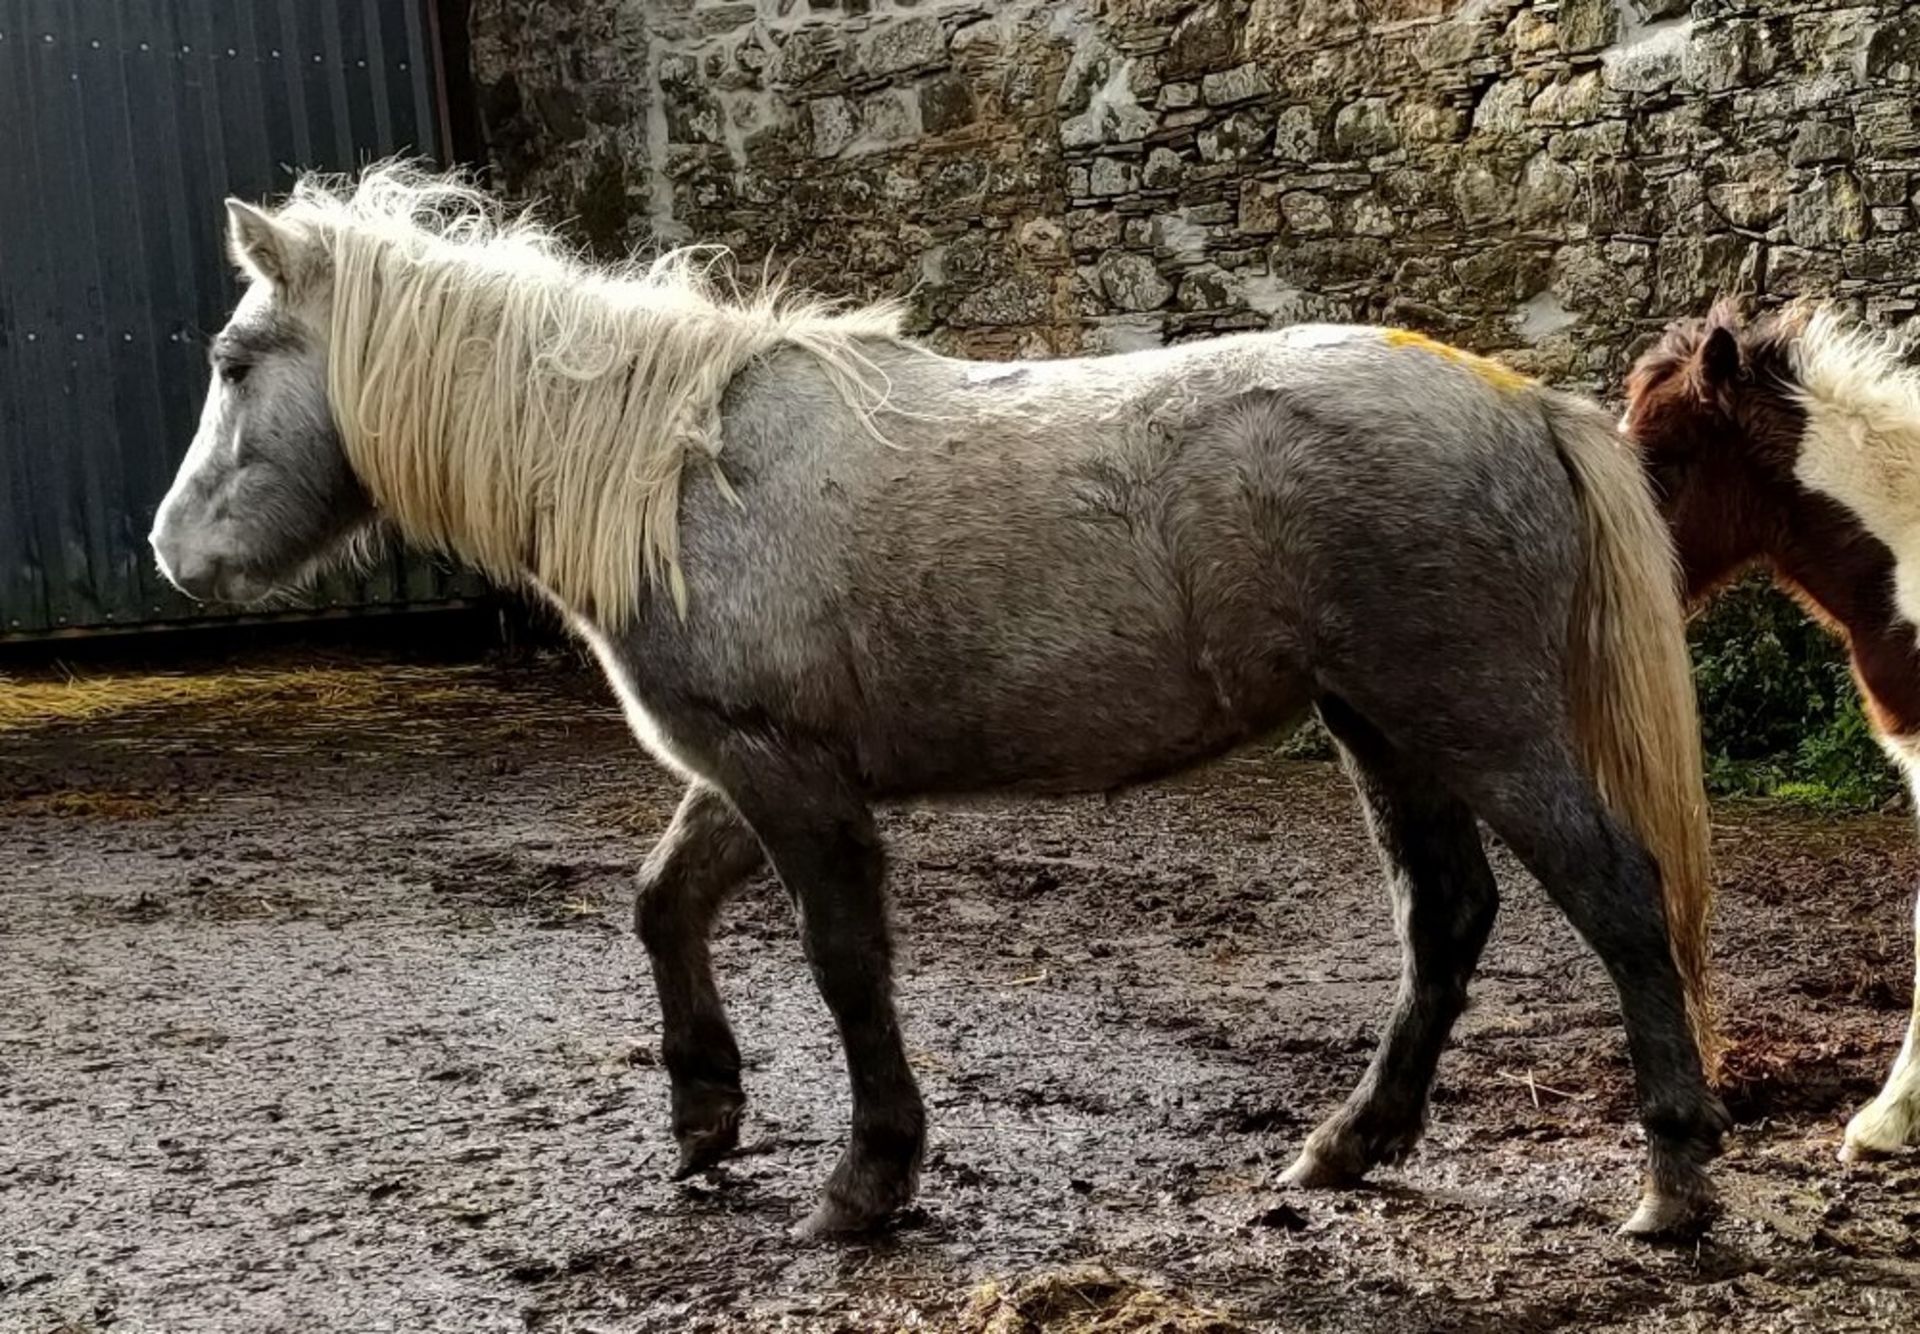 'GODSWORTHY' DARTMOOR HILL PONY GREY FILLY APPROX 18 MONTHS OLD - Image 5 of 10